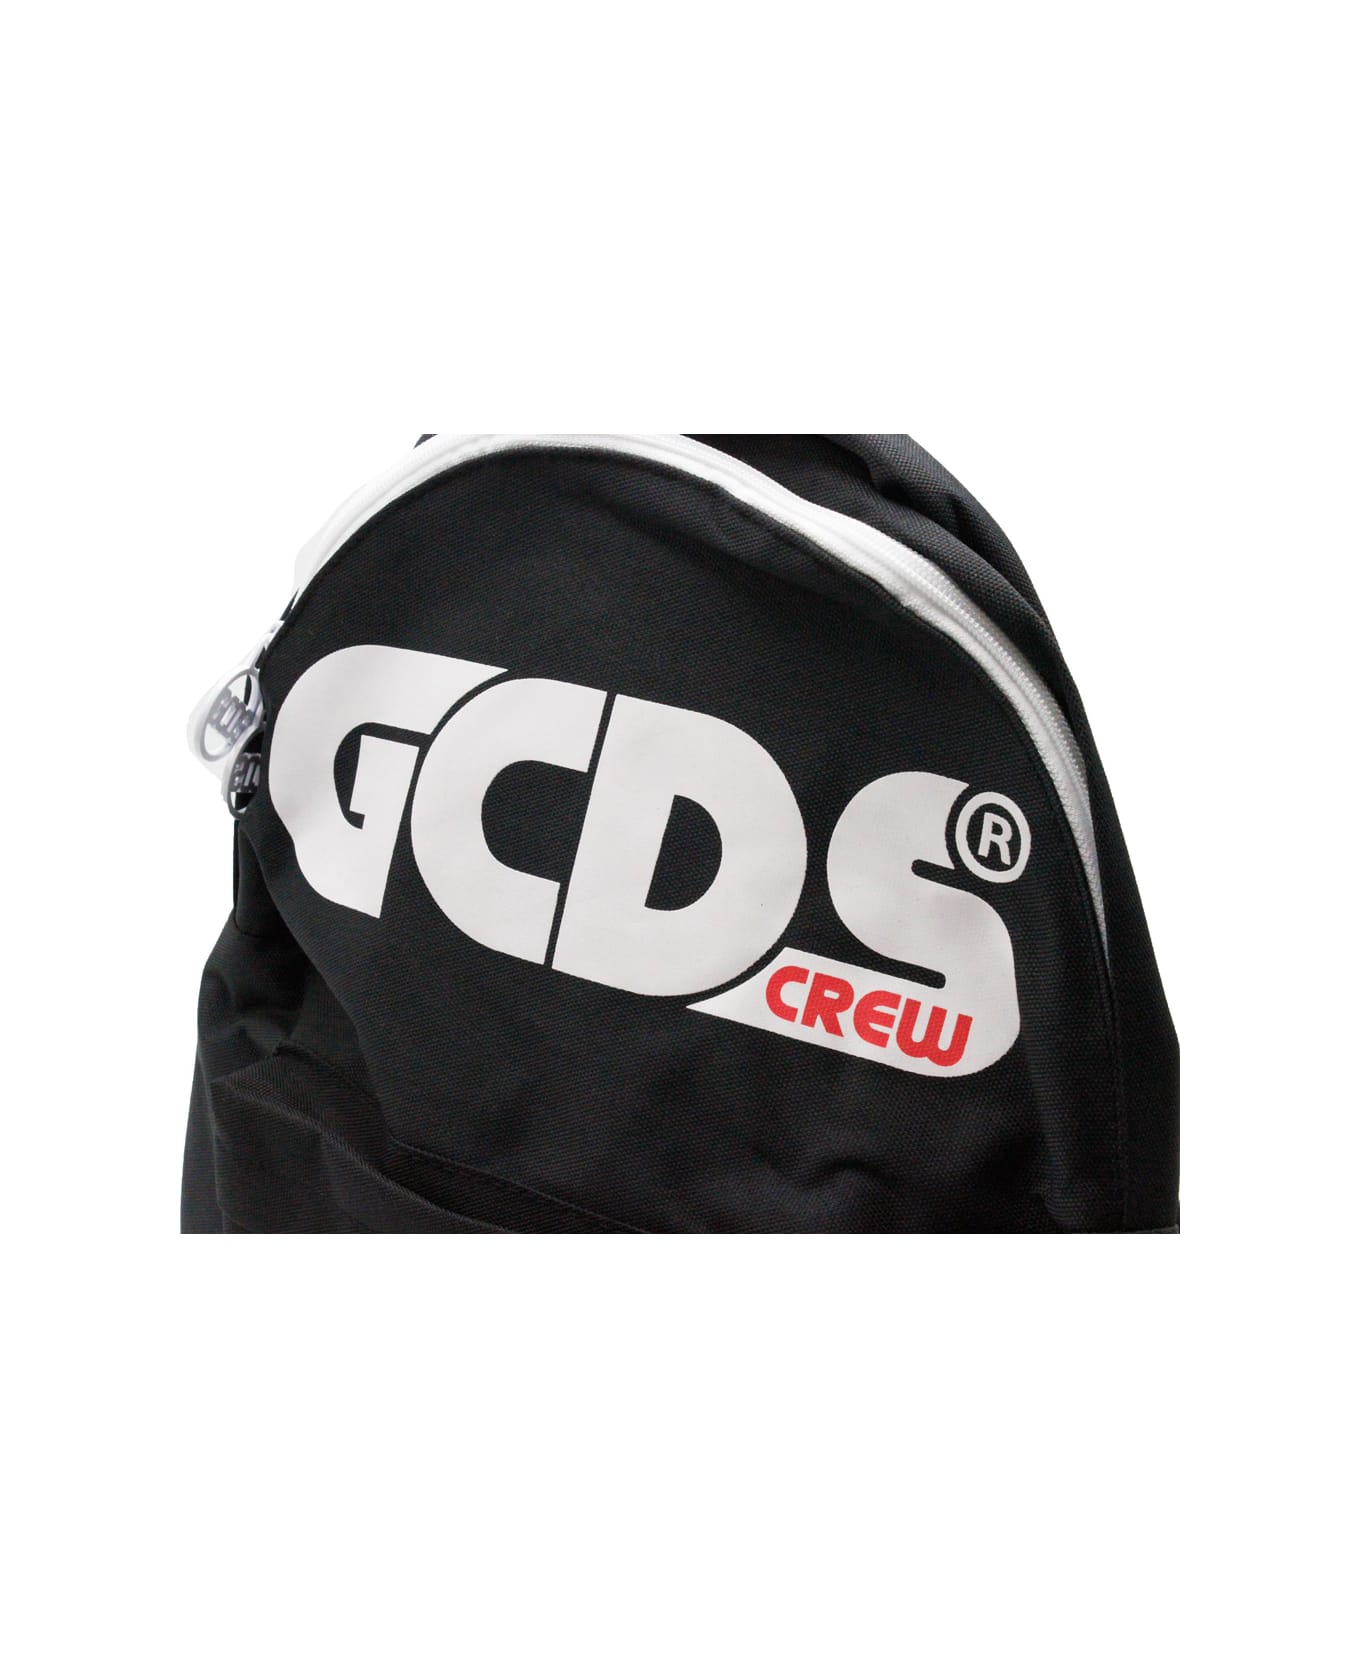 GCDS Backpack With Writing - Black アクセサリー＆ギフト